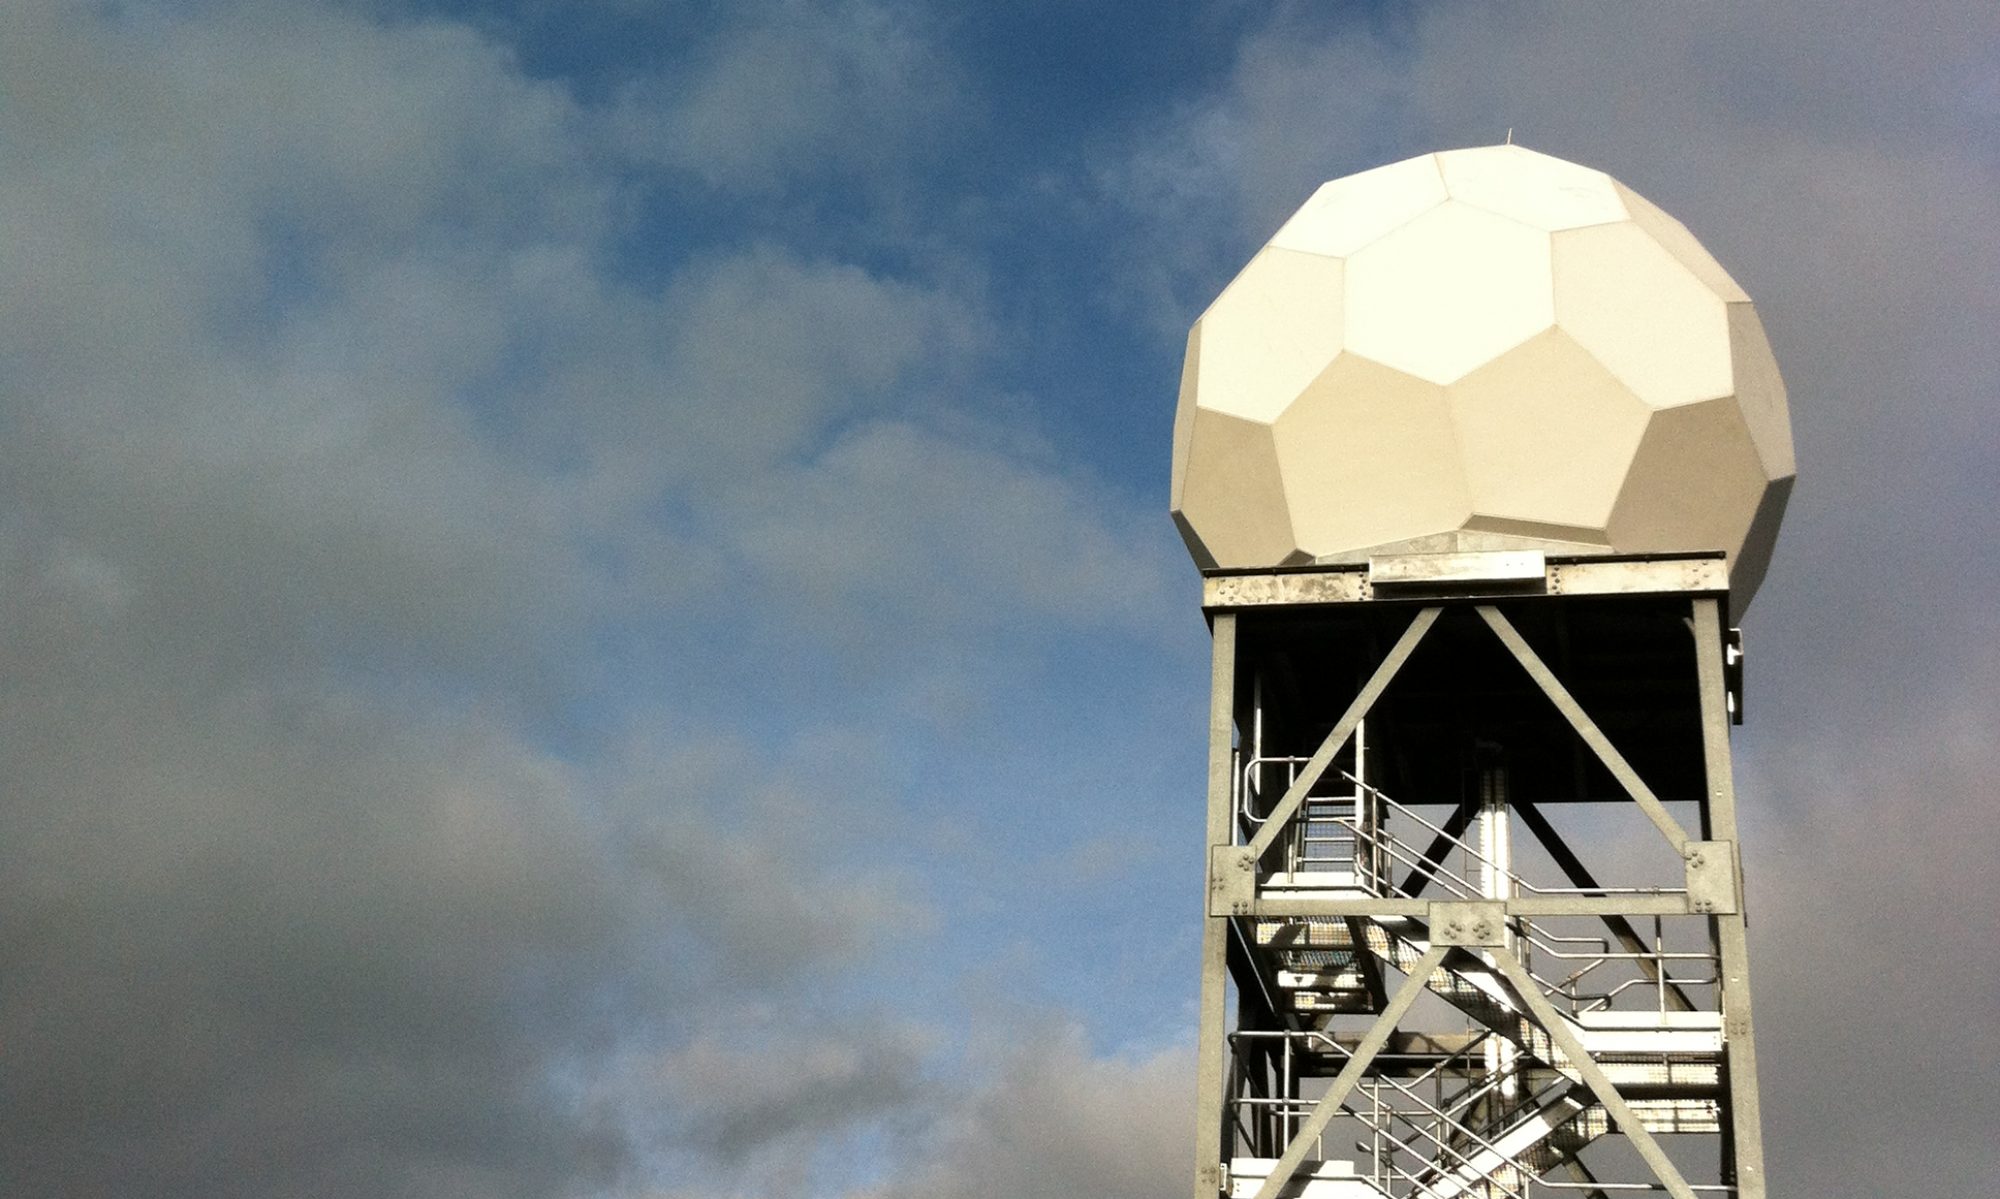 The Inter Agency Committee on the Hydrological Use of Weather Radar